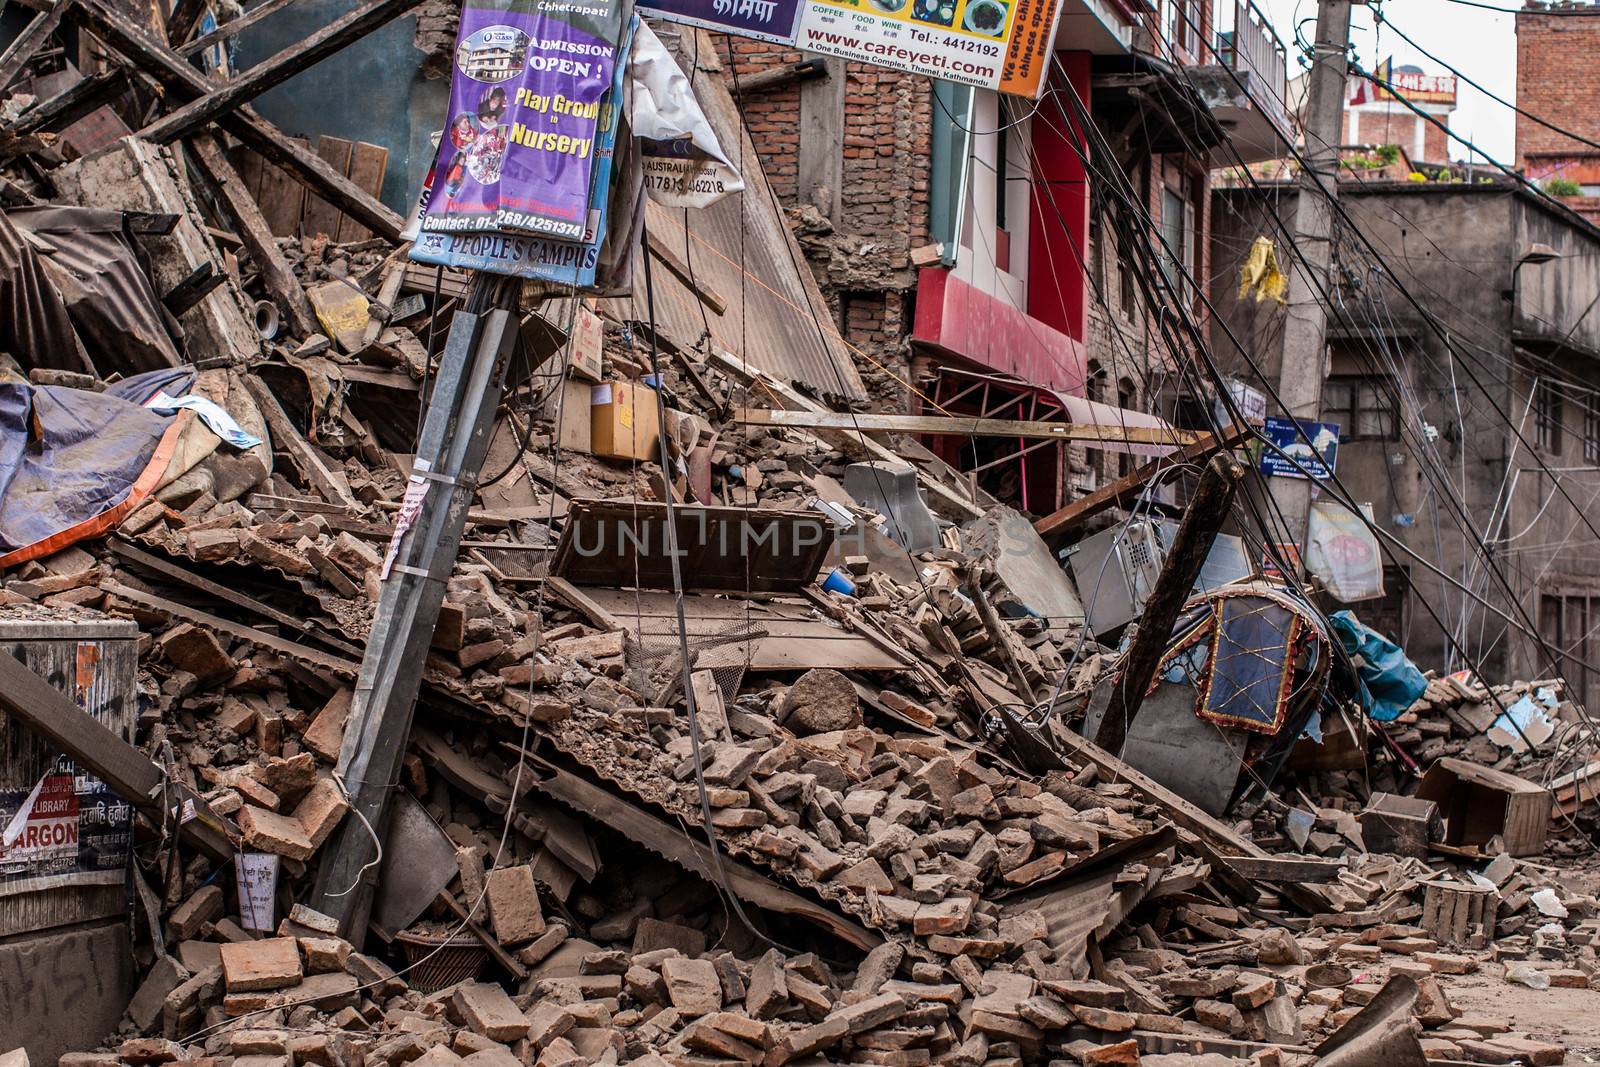 NEPAL,Kathmandu: A collapsed building covers the street after being destroyed by a large earthquake on April 25, 2015.More than 8,000 people died in the quake and some 3.5 million were left homeless. 